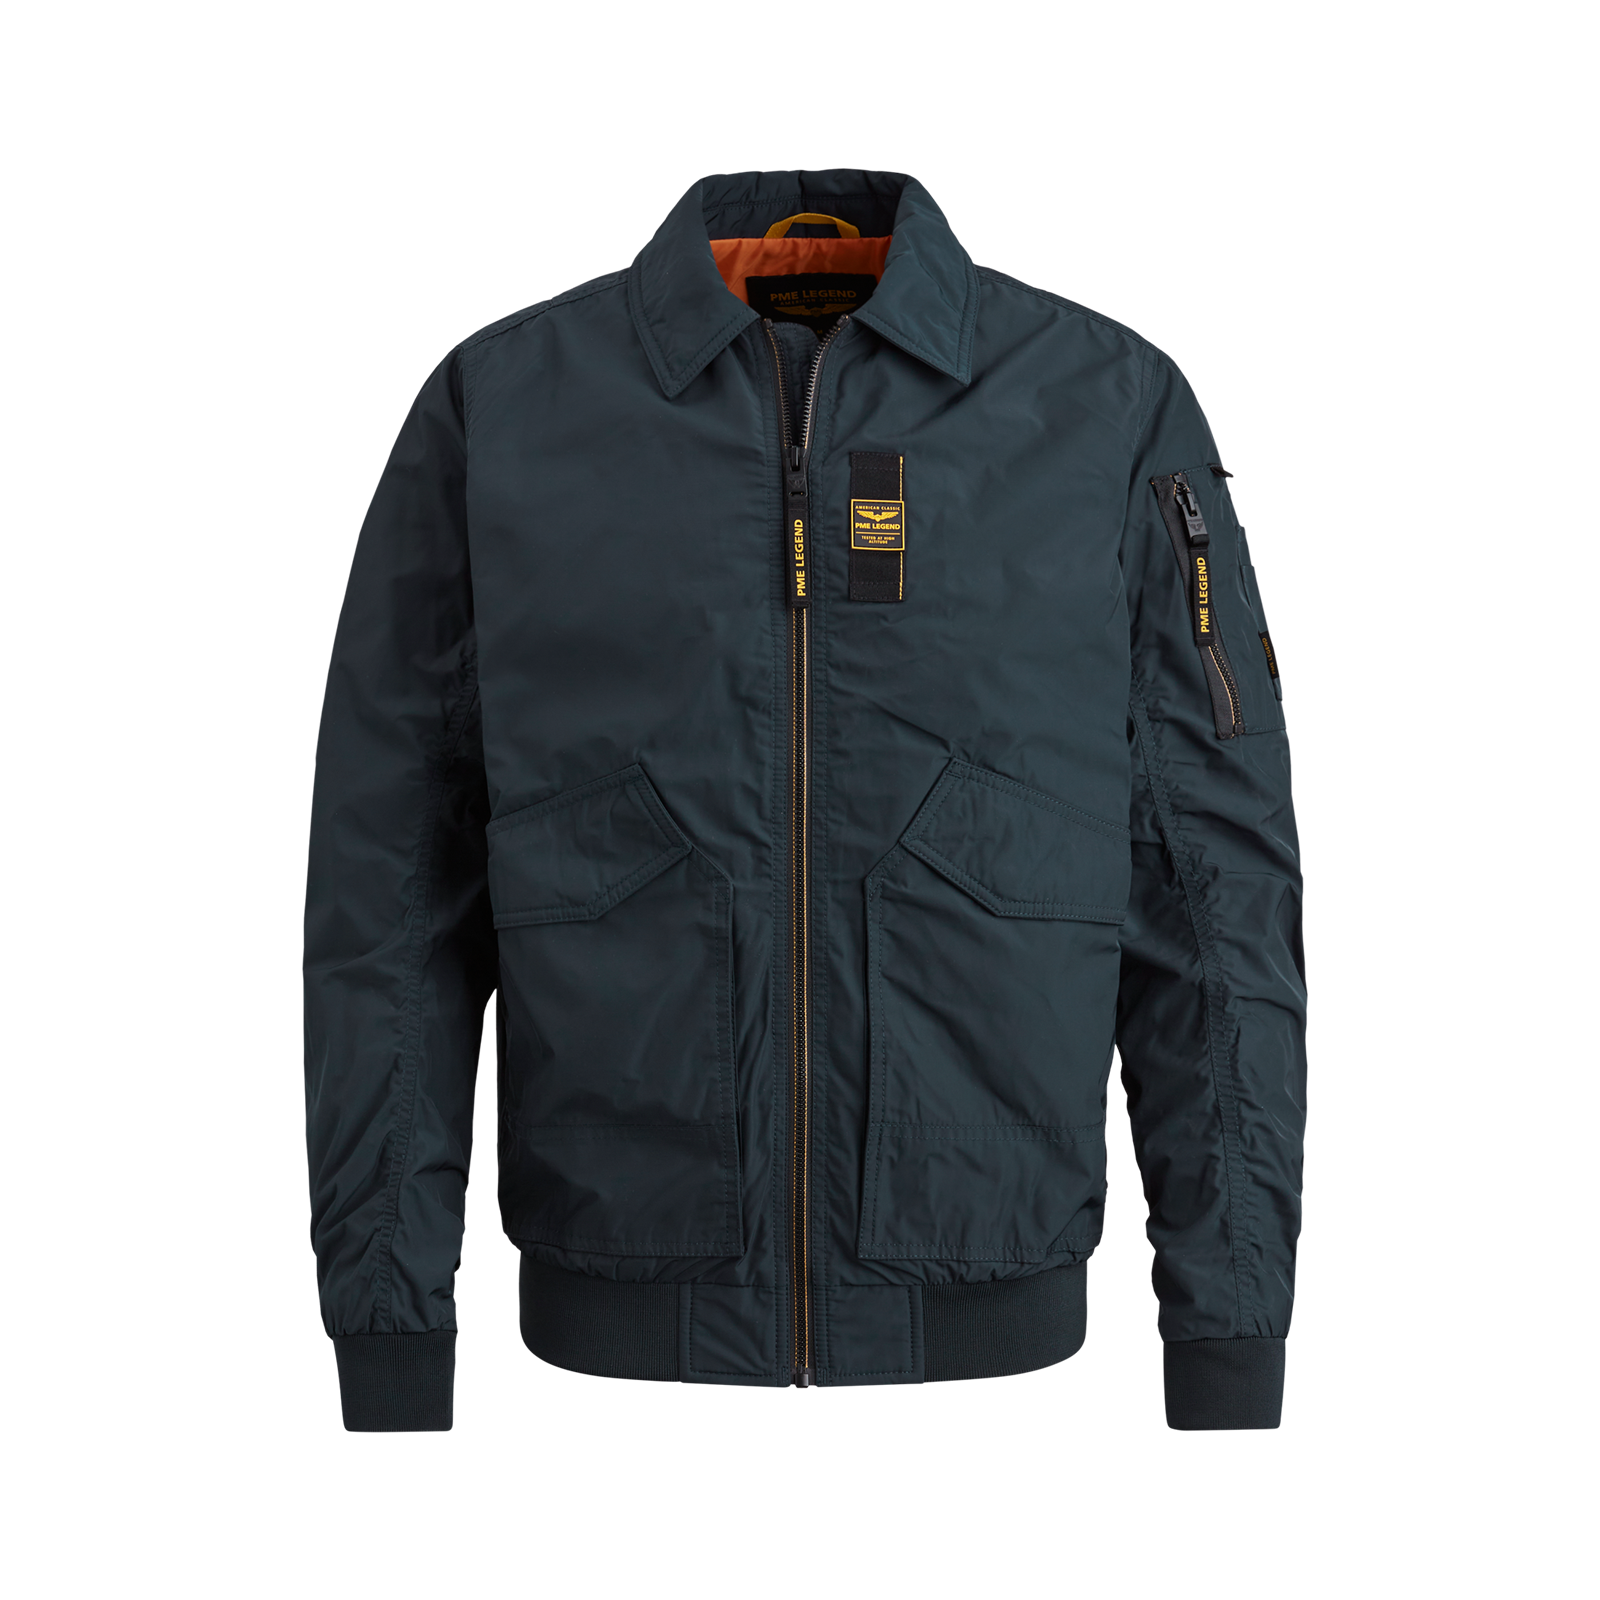 PME Legend American Classic - The PME Legend Glazer is a crossover between  an authentic MA-1 Navy flight jacket and a cargo flight-inspired jacket.  It's a versatile item perfect for summer. Authentic